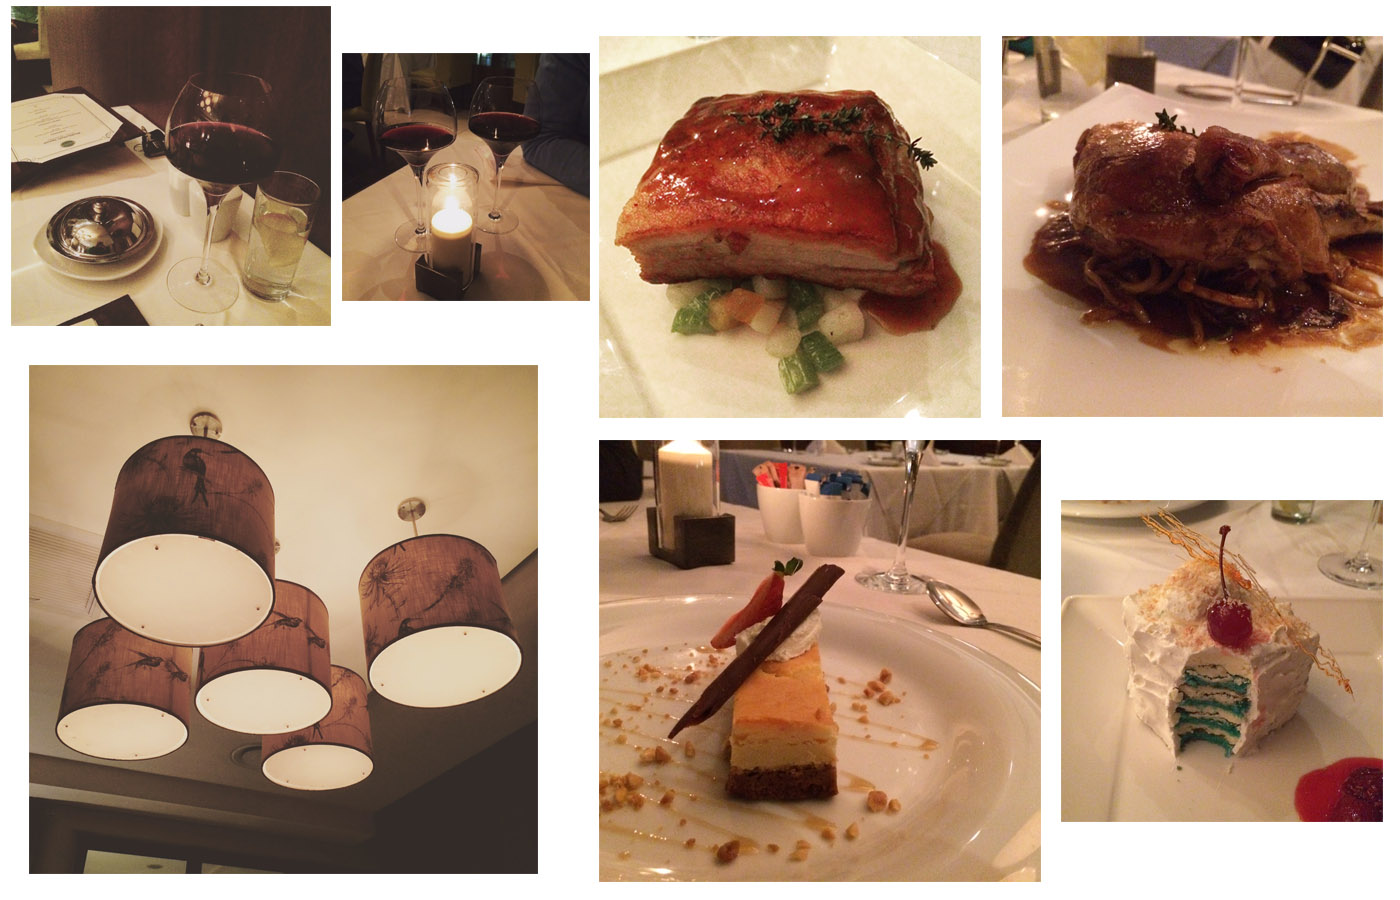 Selection of photos from dinner at Balata Restaurant (taken with my iPhone)